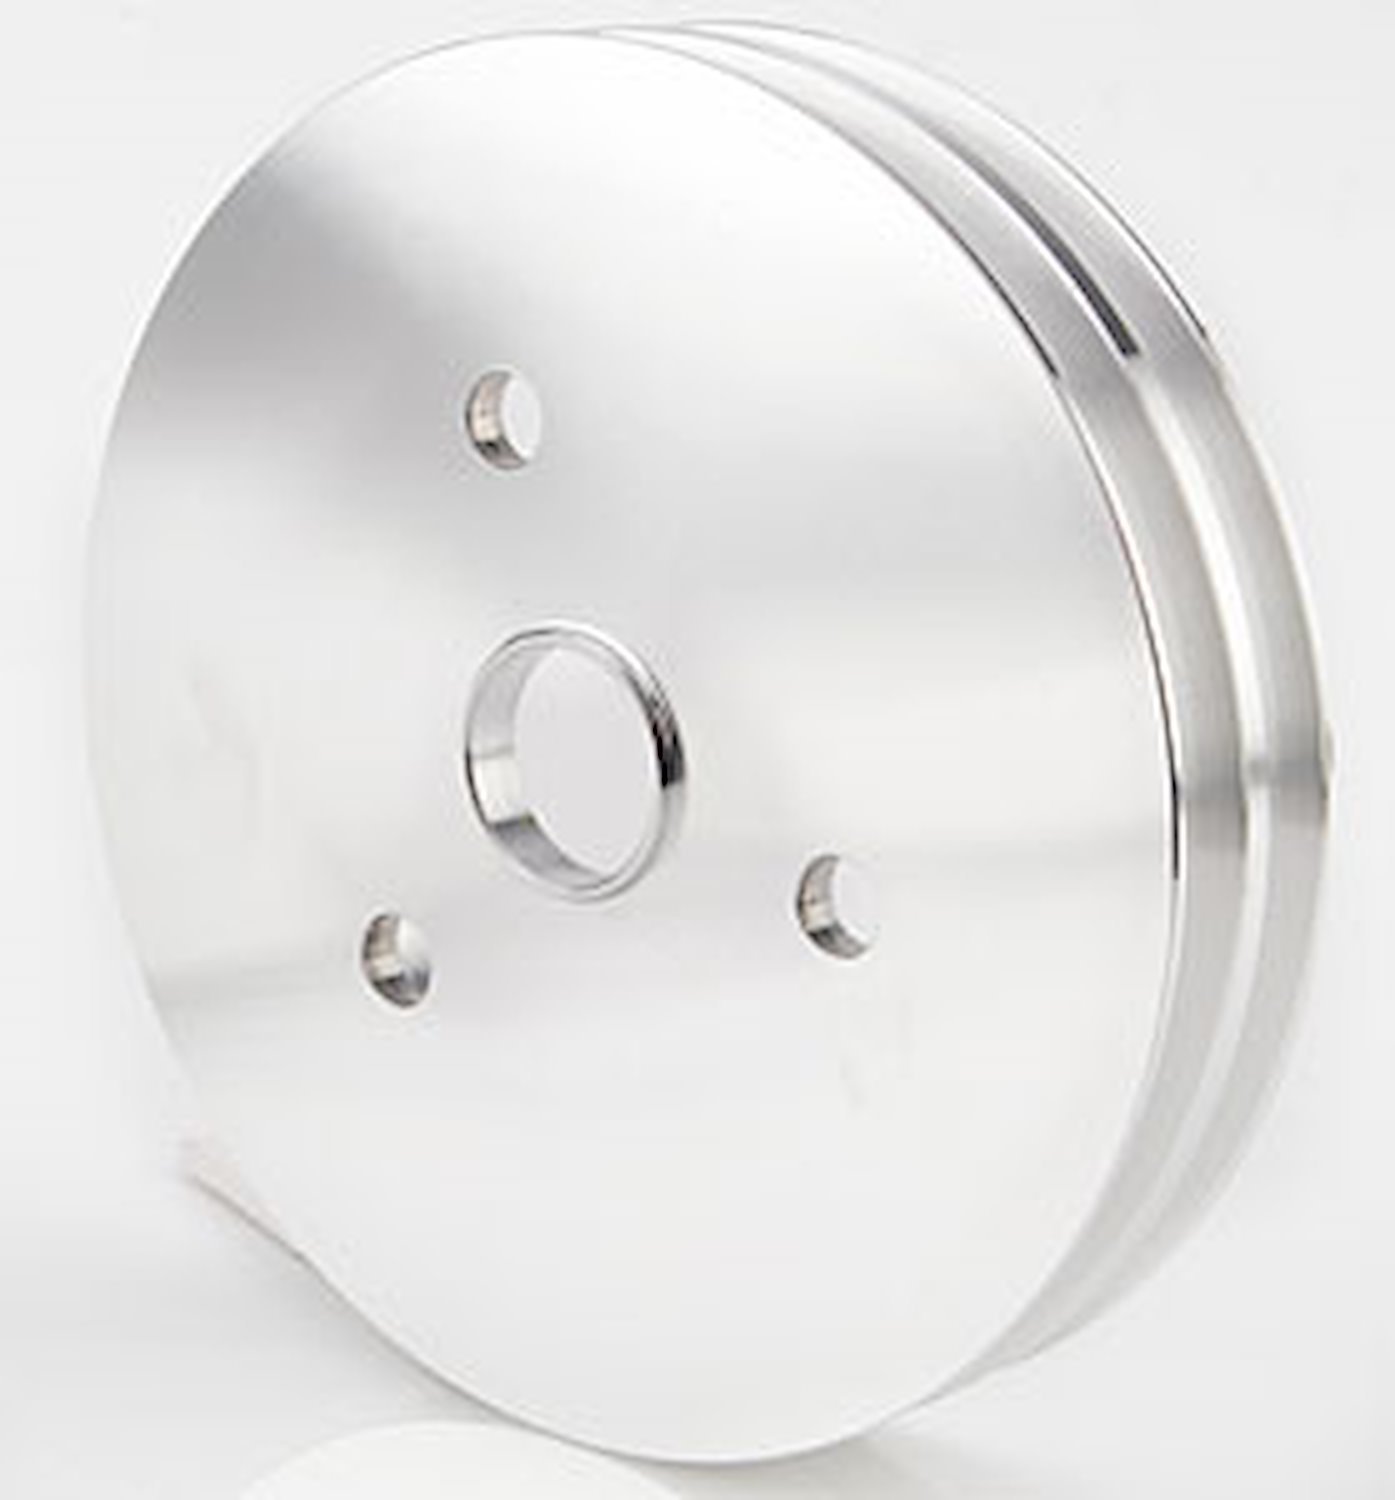 SB-Chevy Crank Pulley Double-groove